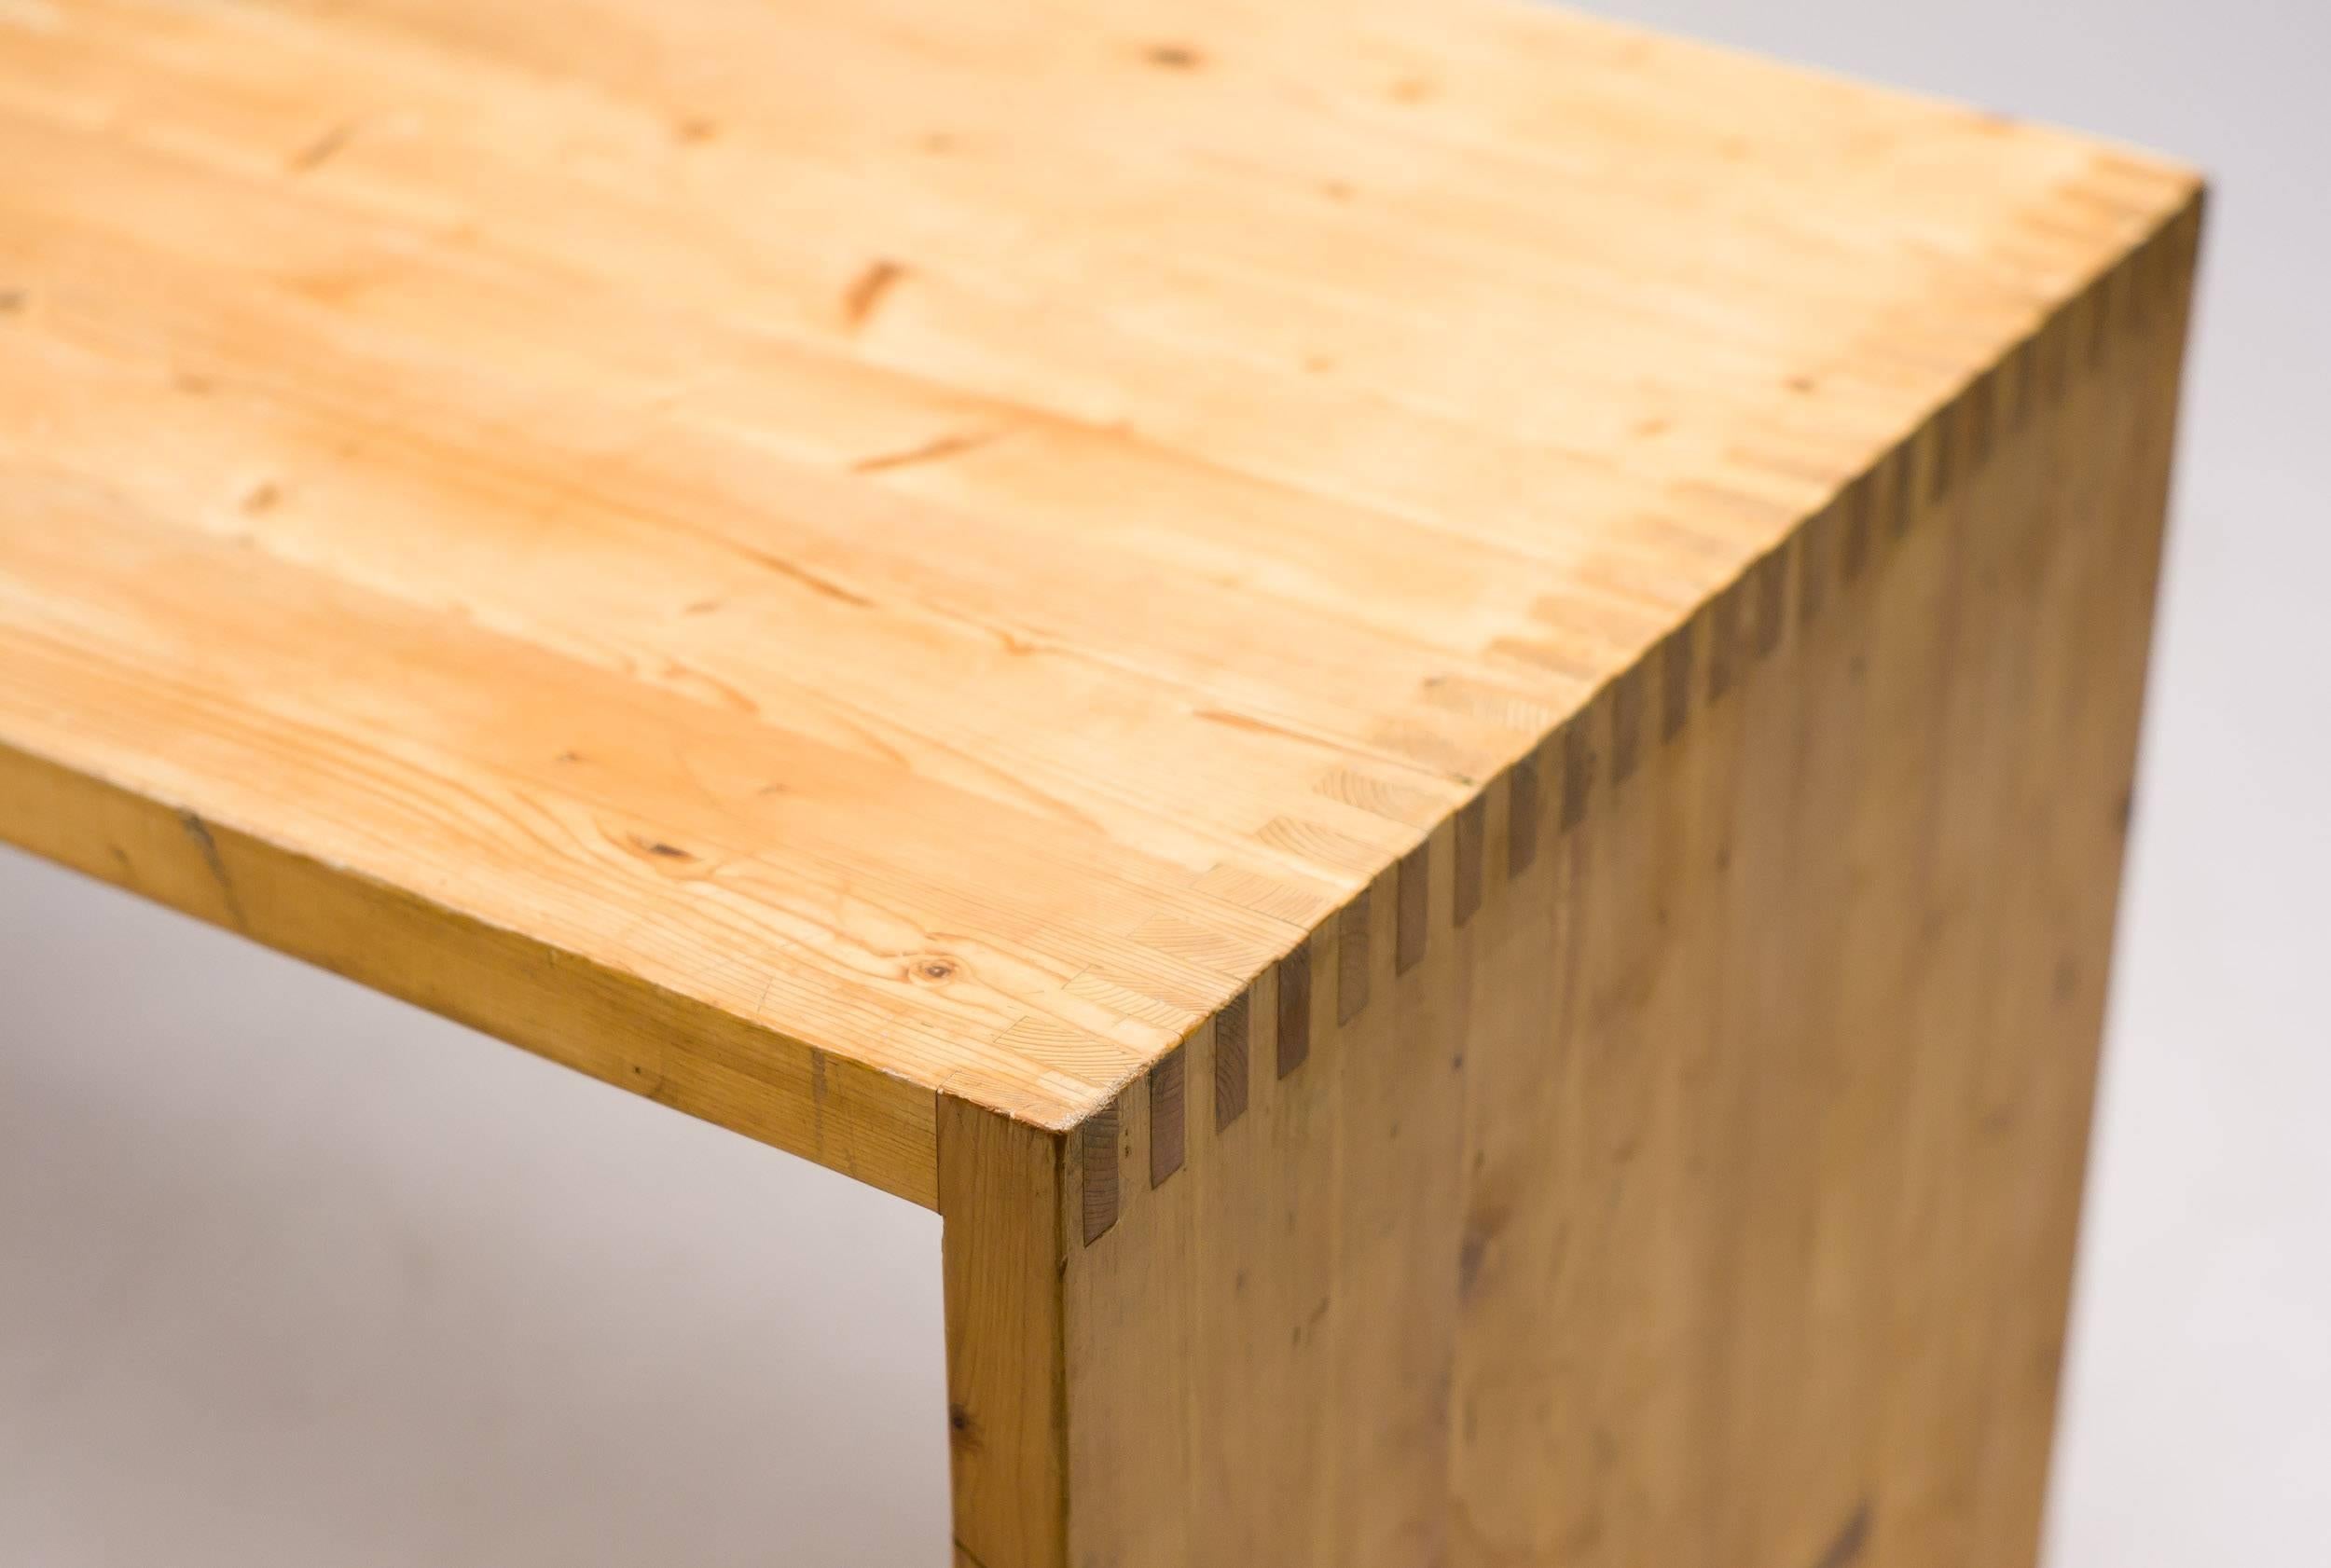 Architectural dining table or desk in solid pine with dovetail joints designed in 1960 by Ate Van Apeldoorn. Wonderful proportions. The construction and design are reminiscent of the work of Gerrit Rietveld and Donald Judd.

Excellent fast and